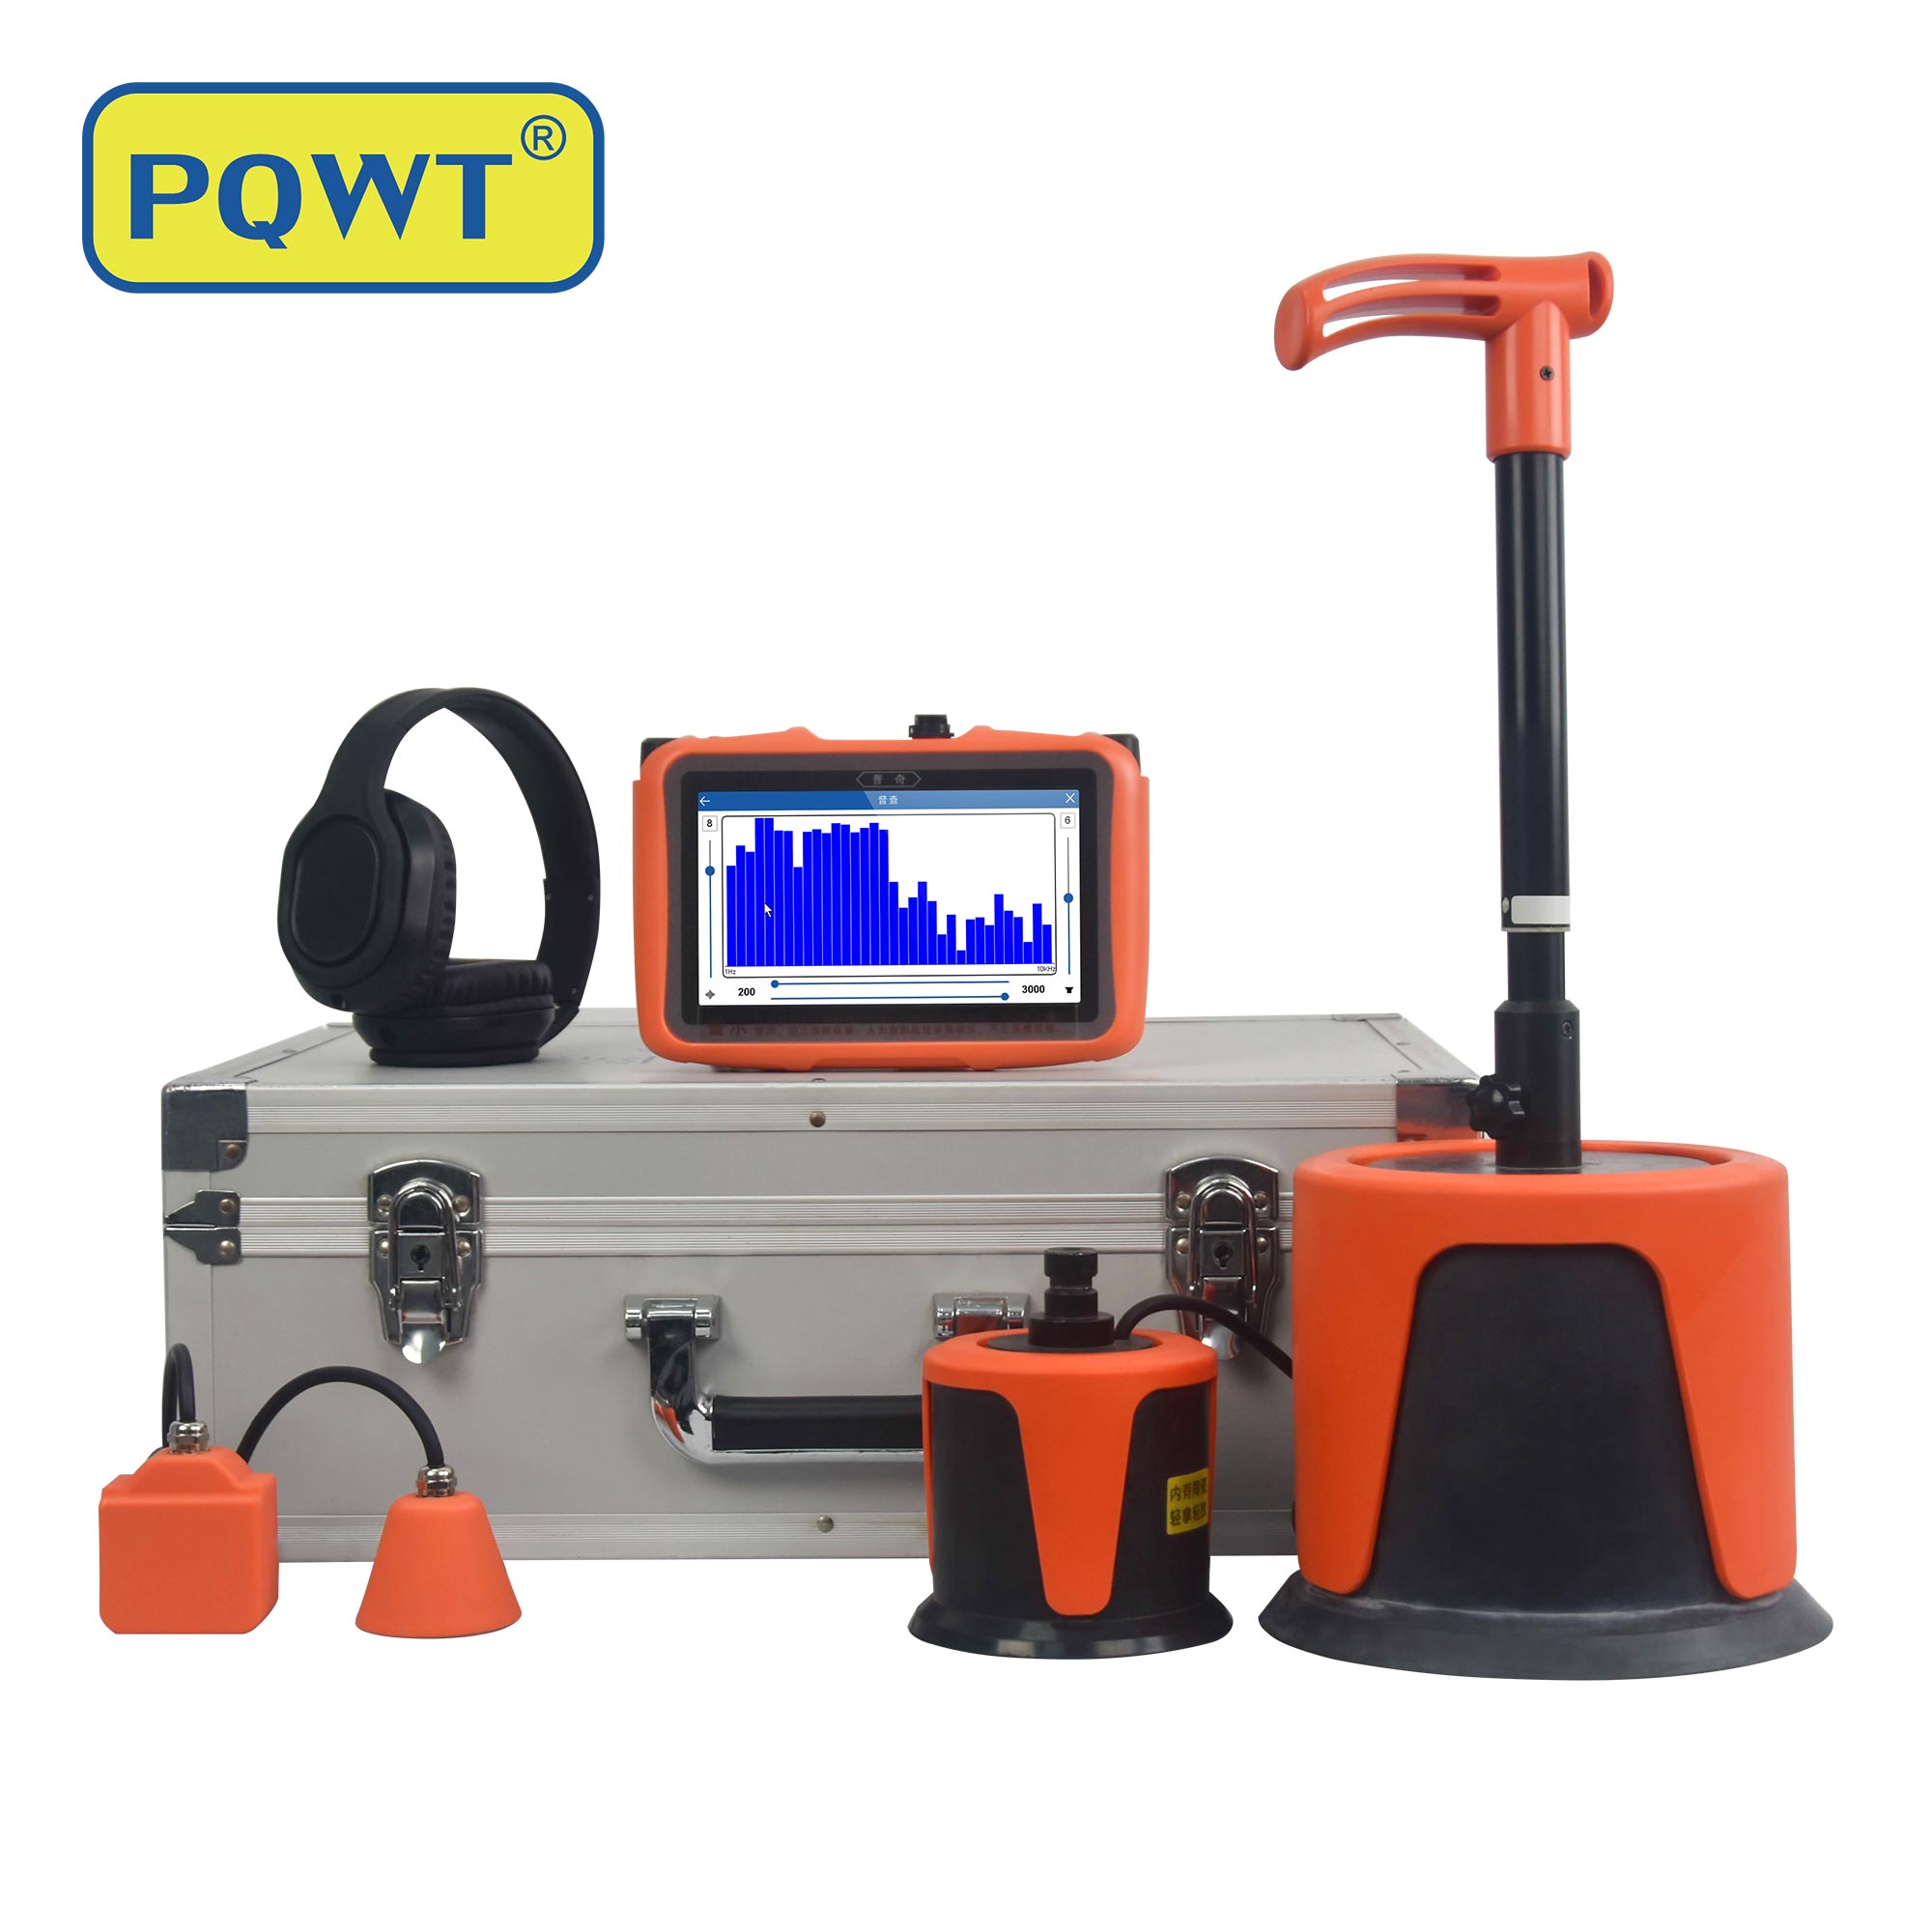 pqwt water detector
